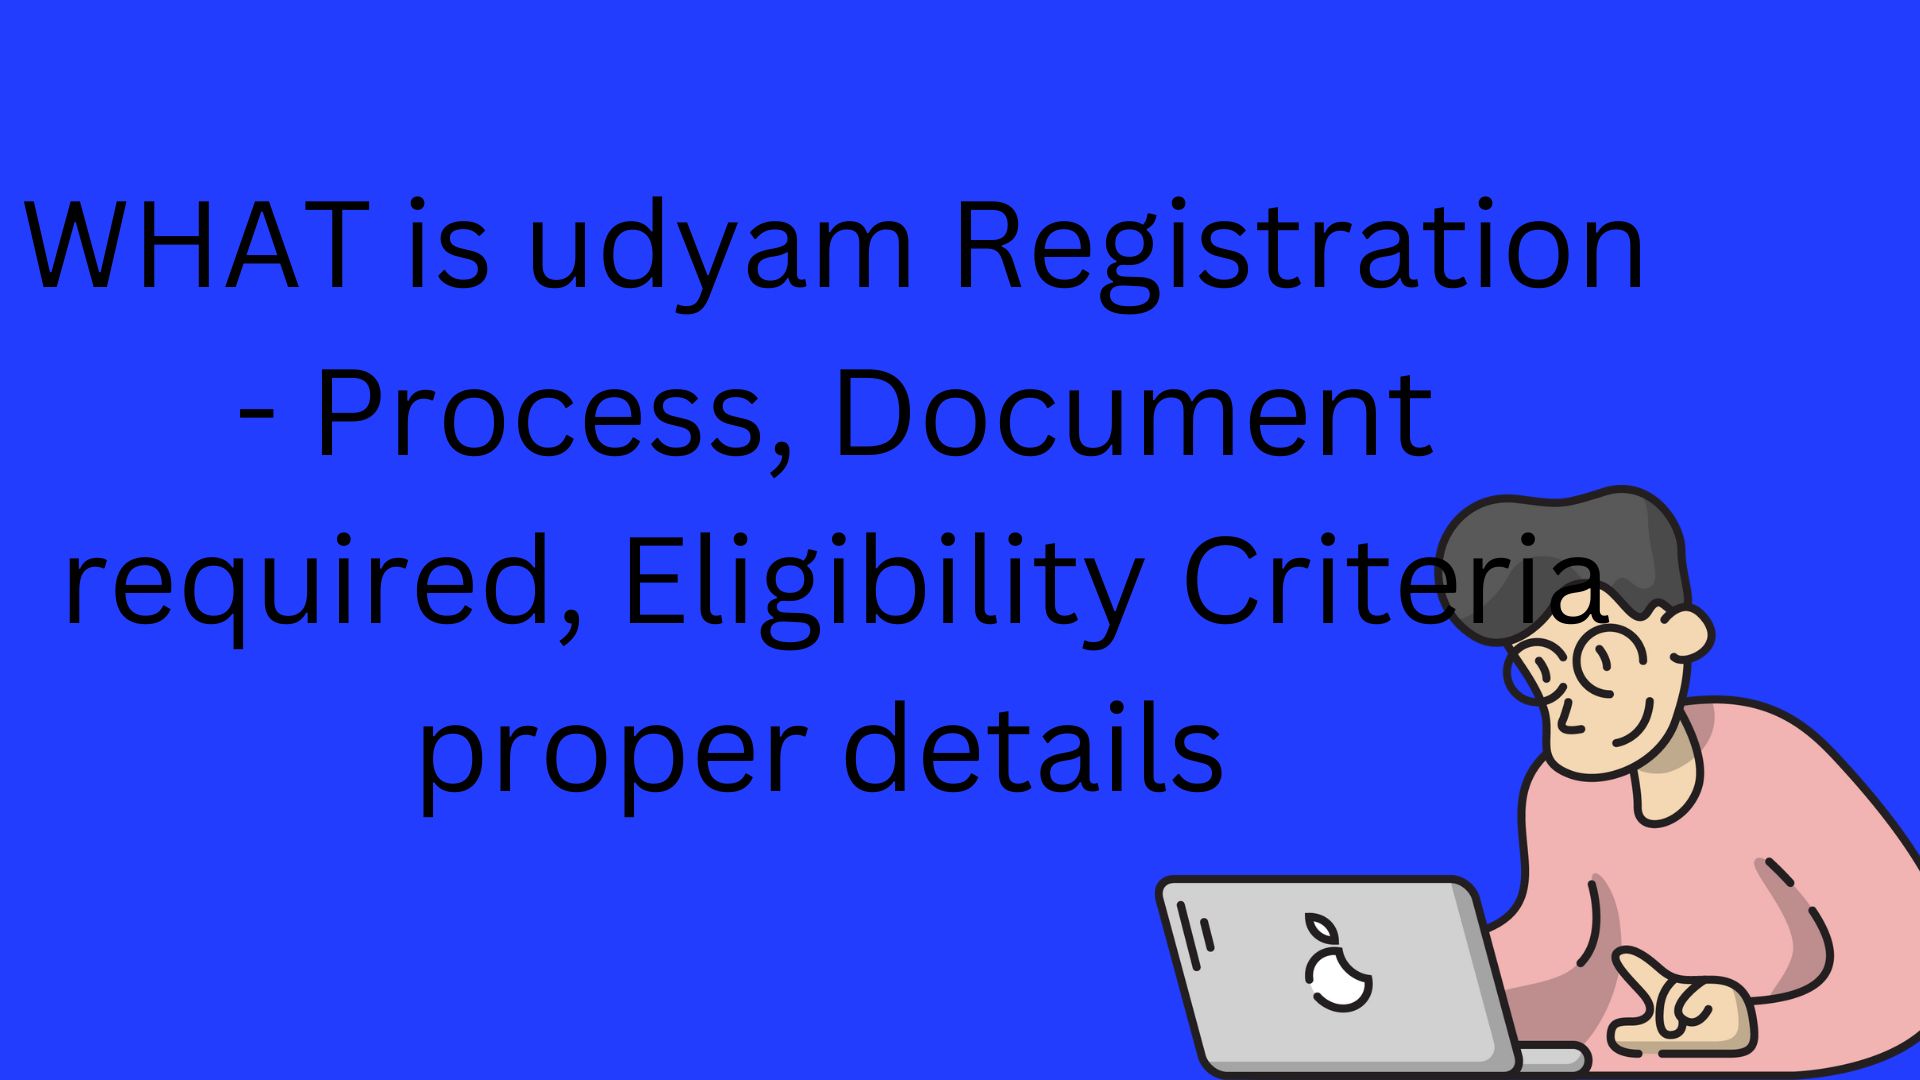 WHAT is udyam Registration - Process, Document required, Eligibility Criteria proper details